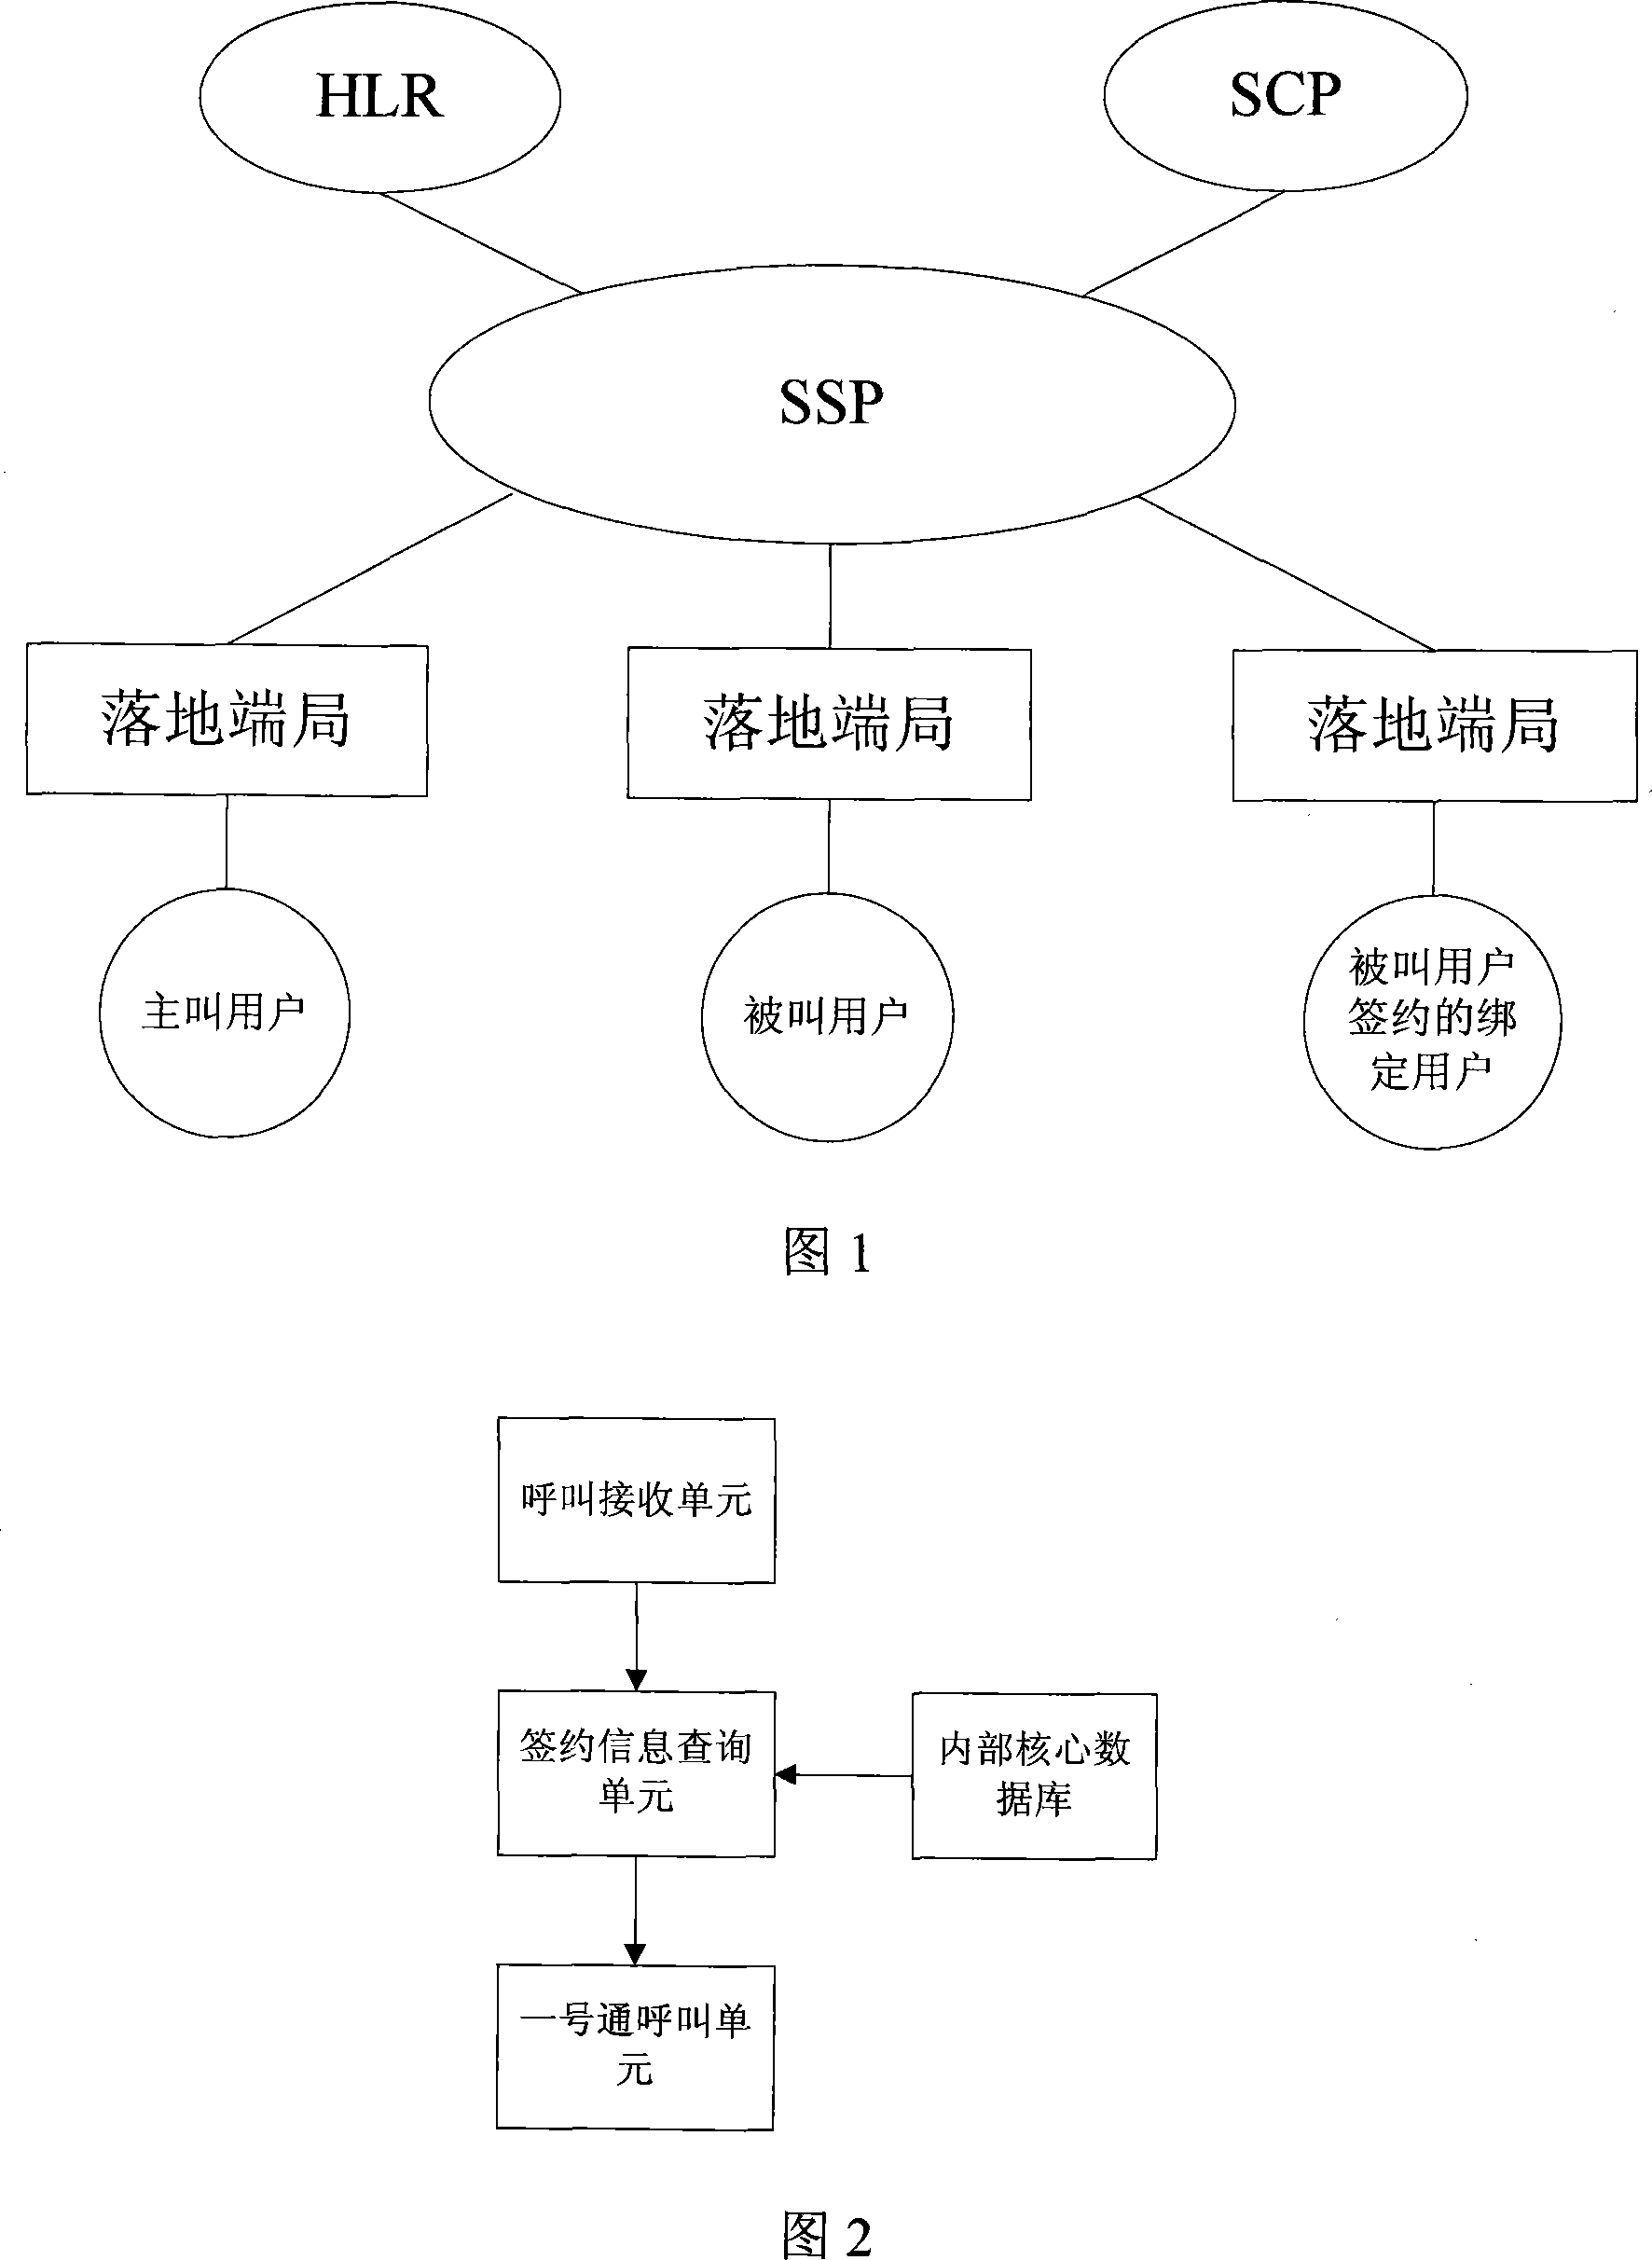 Method and system of implementing universal personal telecommunication service